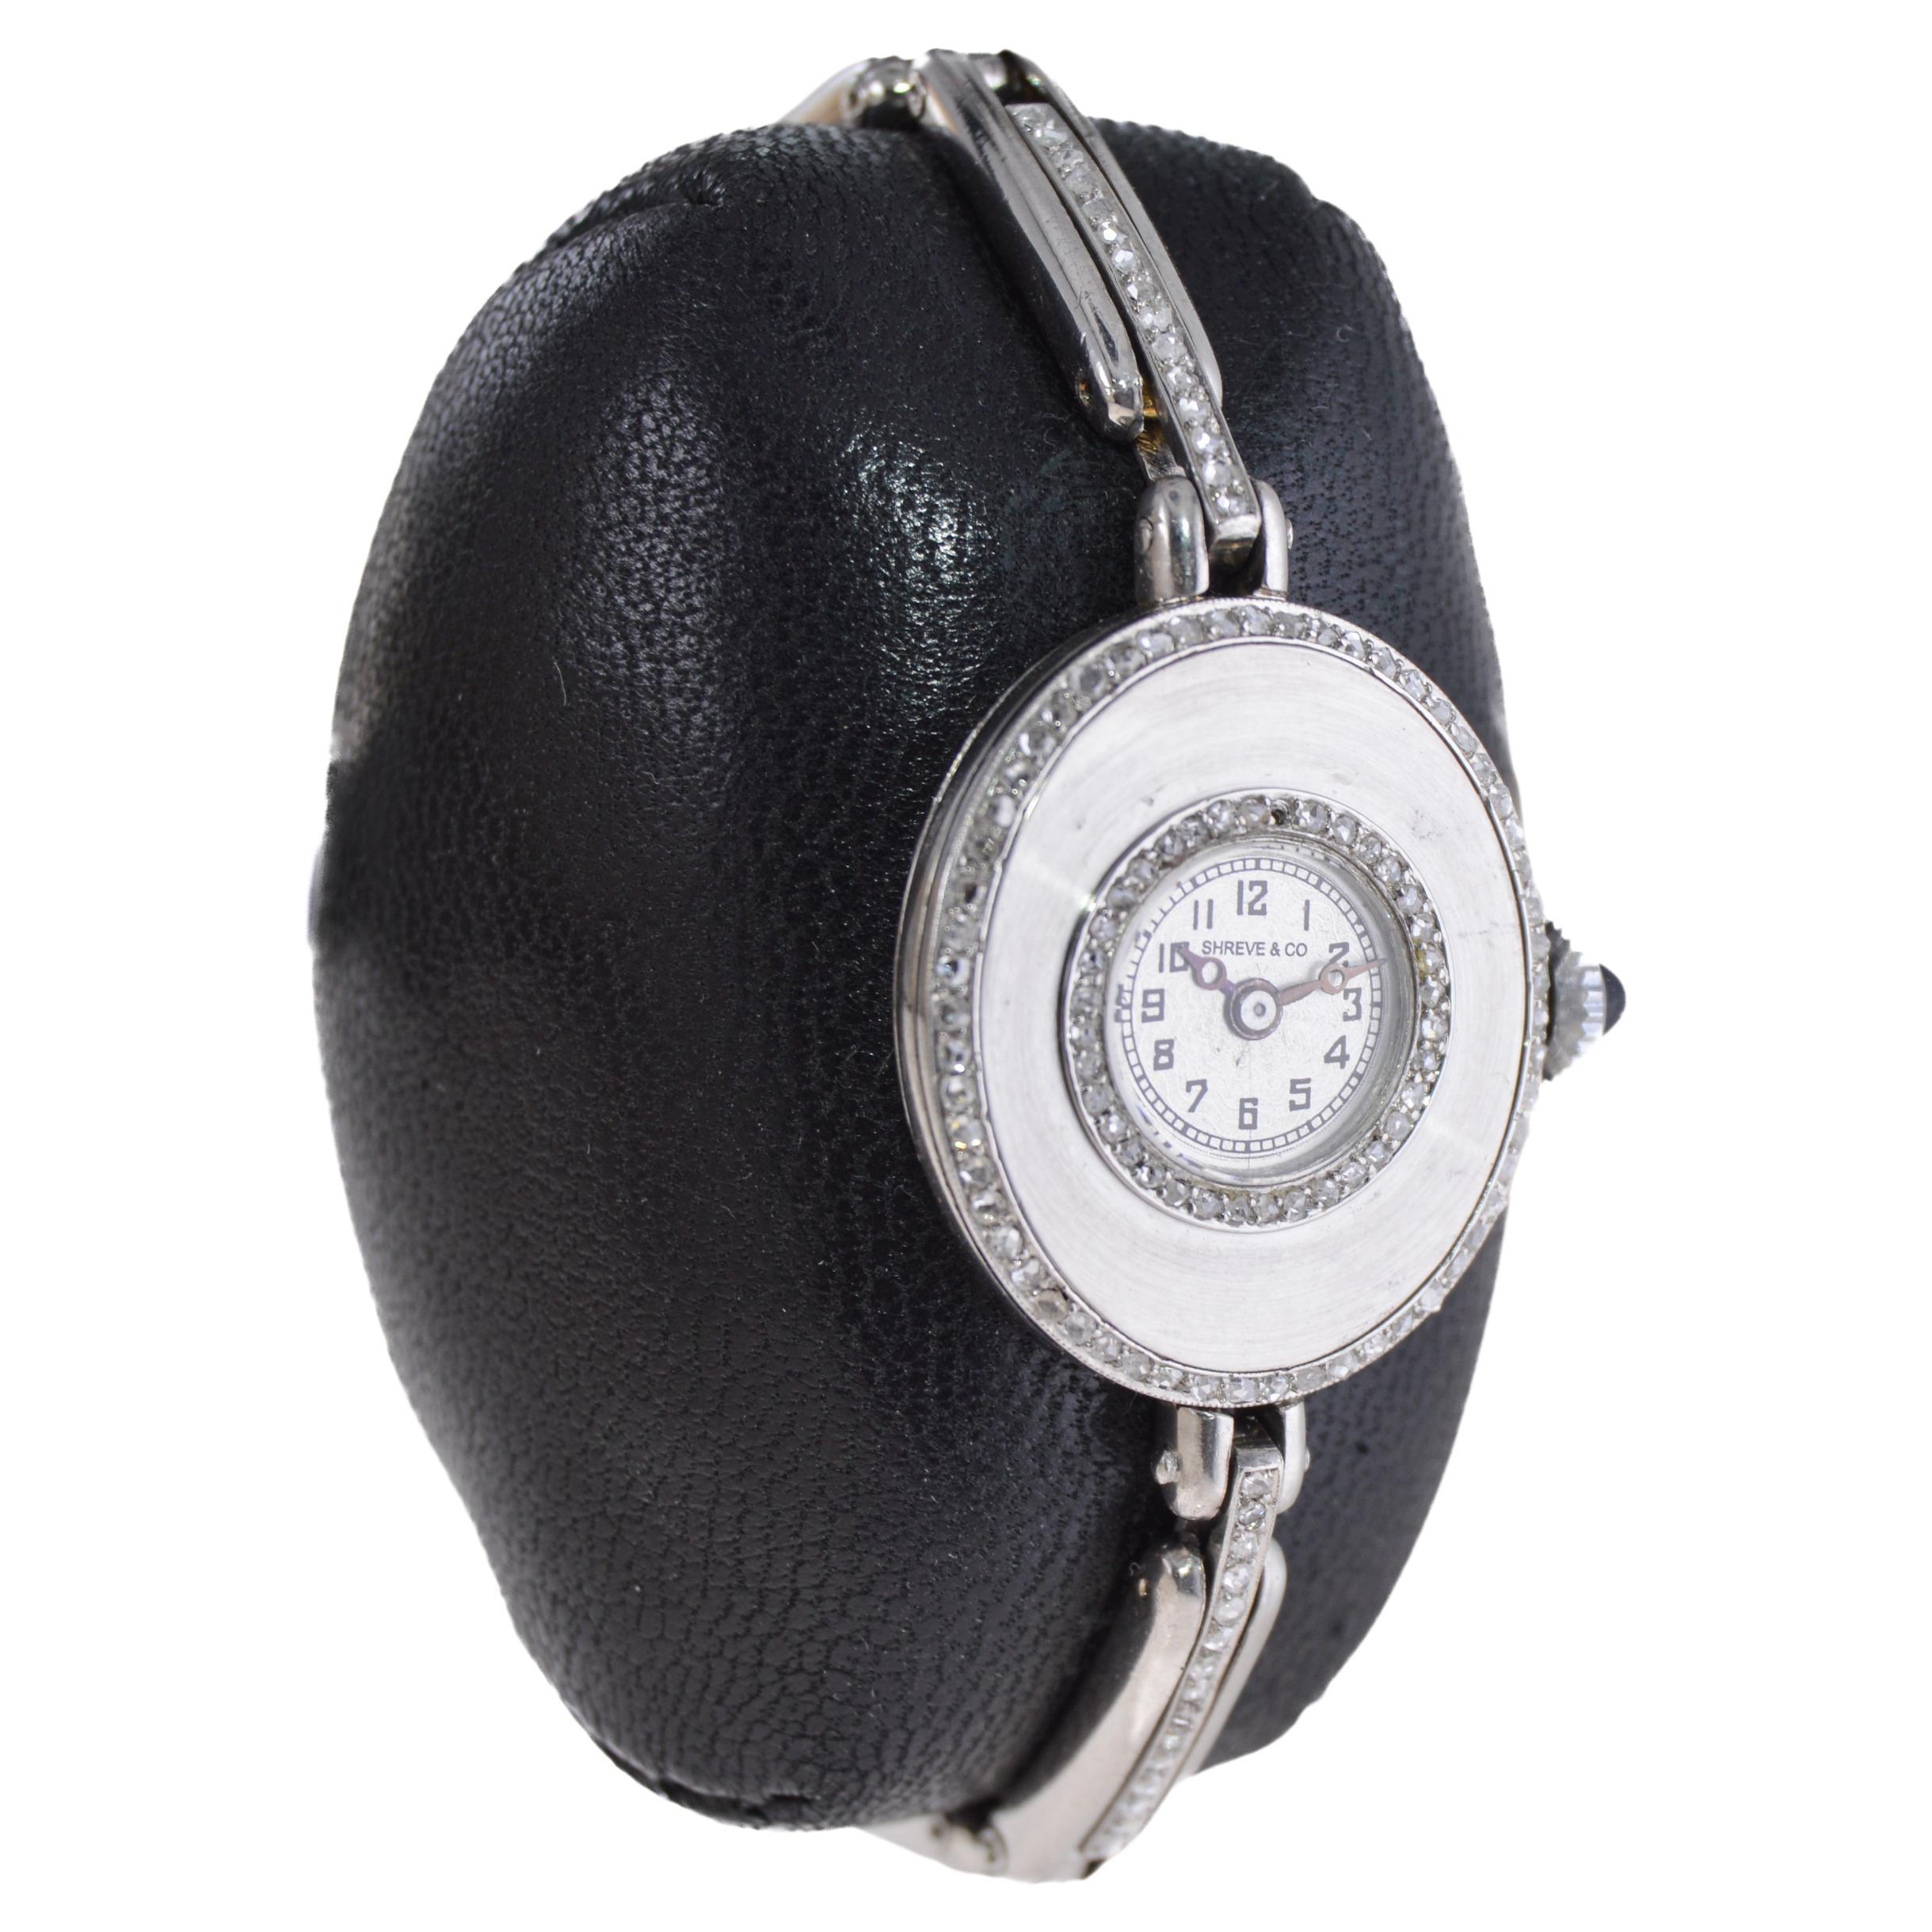 FACTORY / HOUSE: Shreve & Co.
STYLE / REFERENCE: Platinum and Diamond Dress Watch
METAL / MATERIAL: Platinum & Diamonds
CIRCA / YEAR: 1920's
DIMENSIONS / SIZE: 32mm Length X 23mm Diameter
MOVEMENT / CALIBER: Manual Winding / 17 Jewels / Caliber High